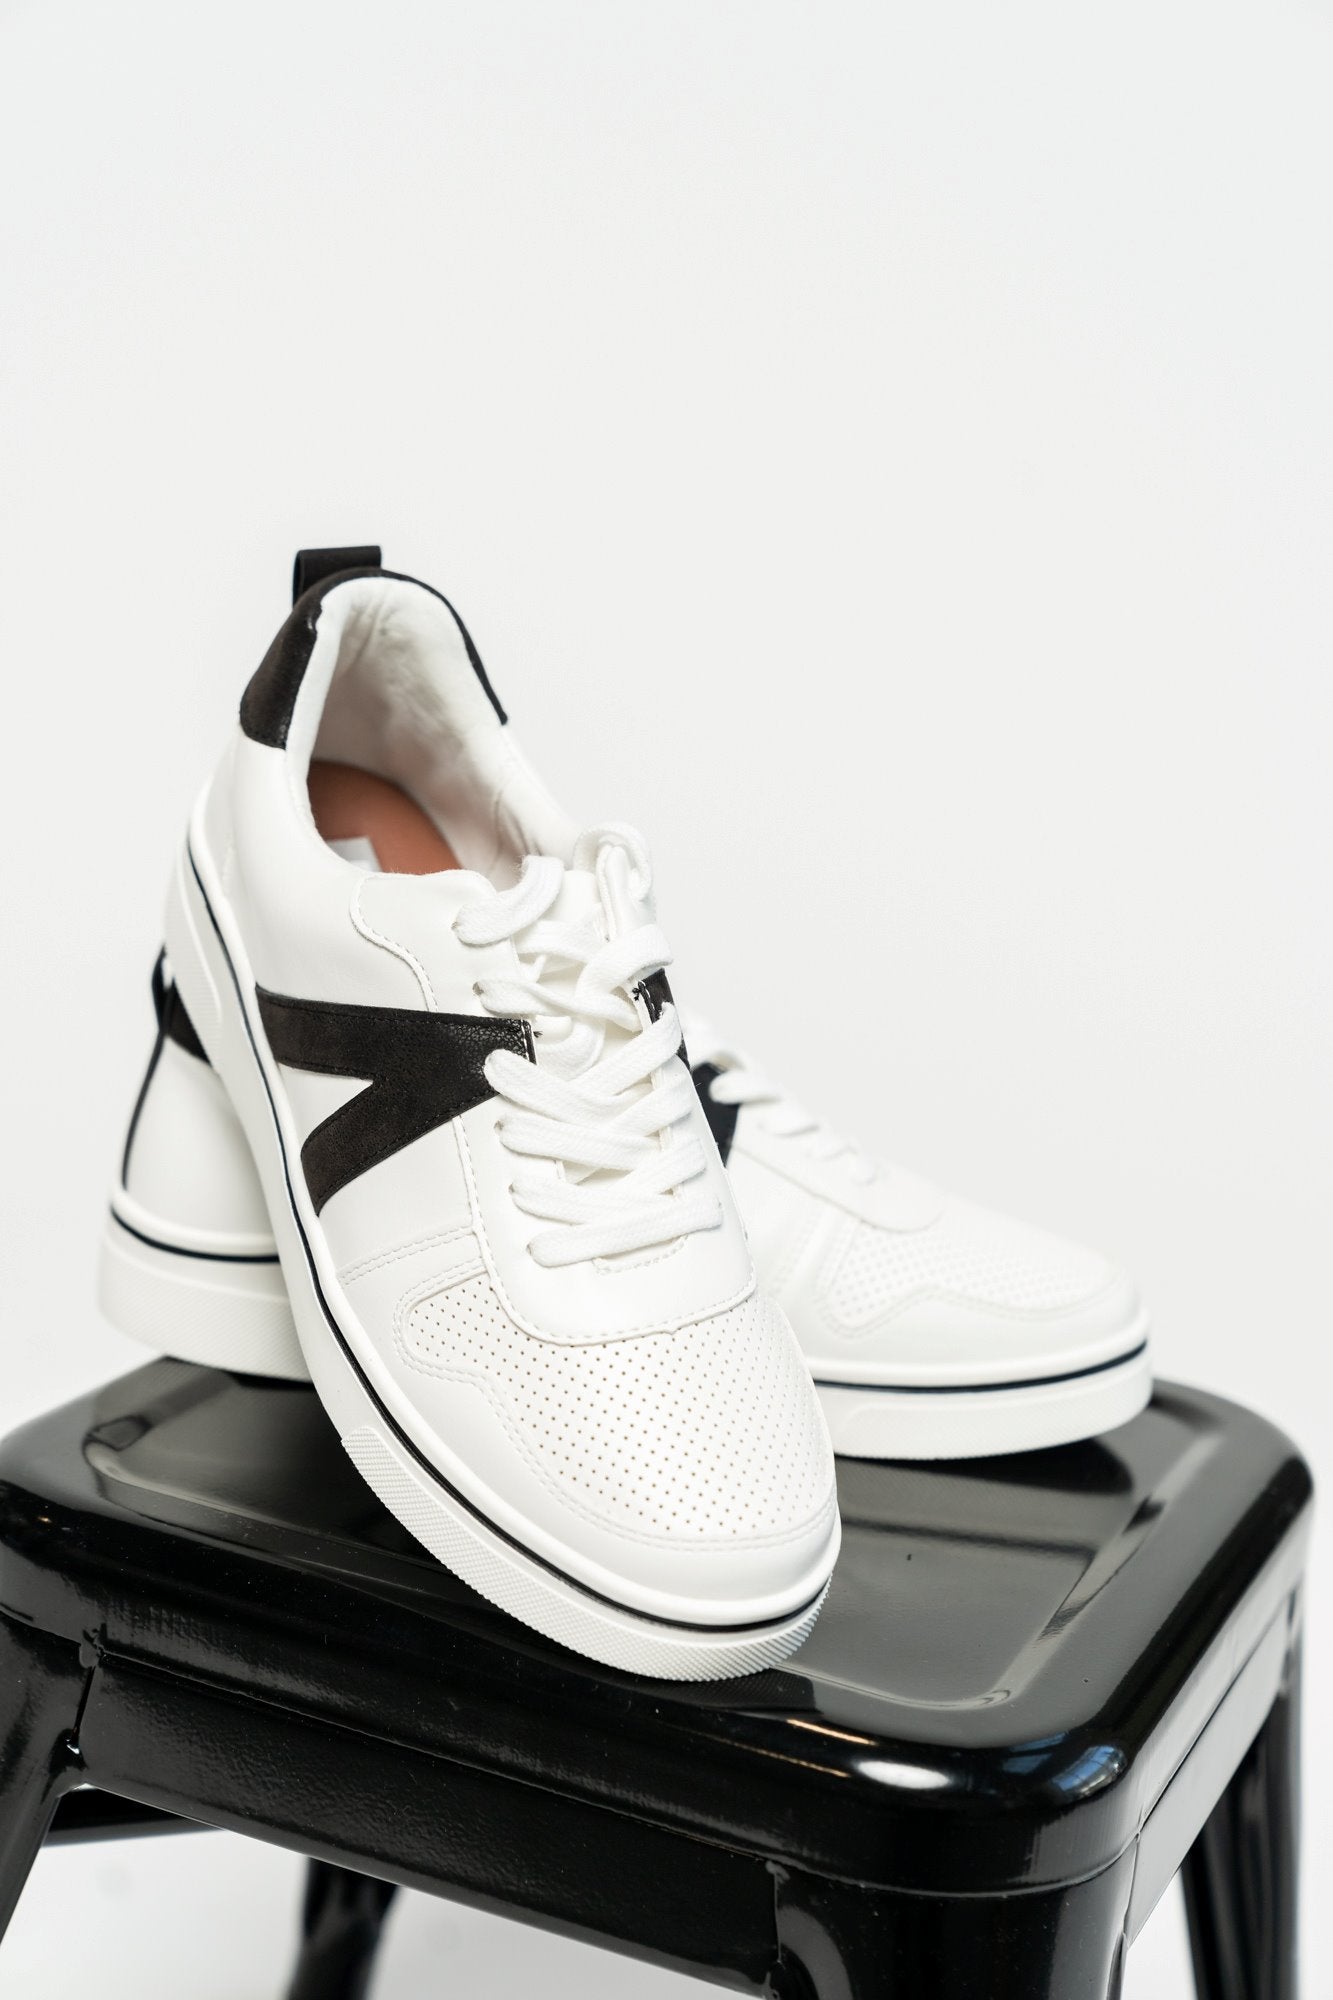 Claire Sneakers in Black Holley Girl 